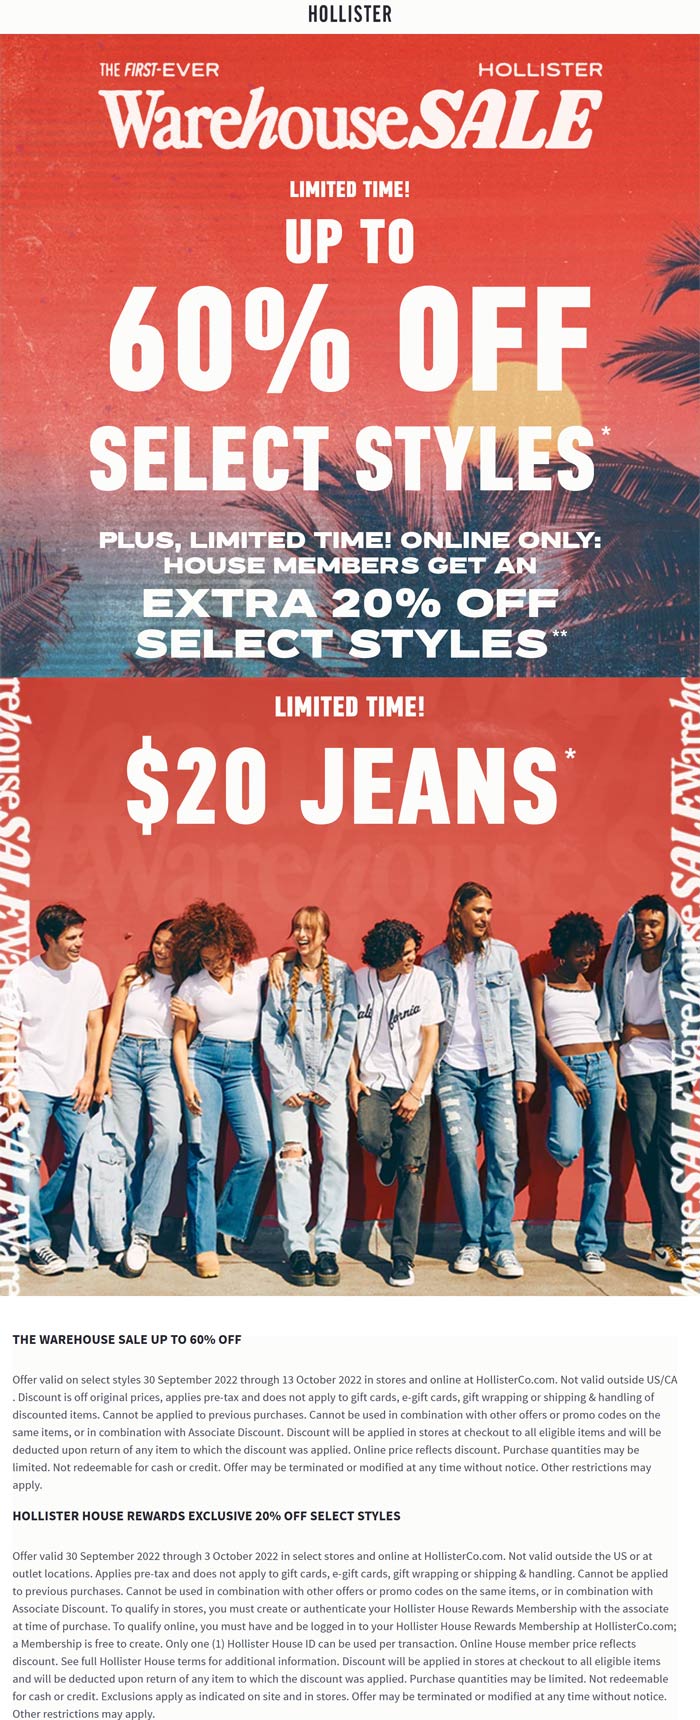 Hollister stores Coupon  $20 jeans & more at Hollister #hollister 